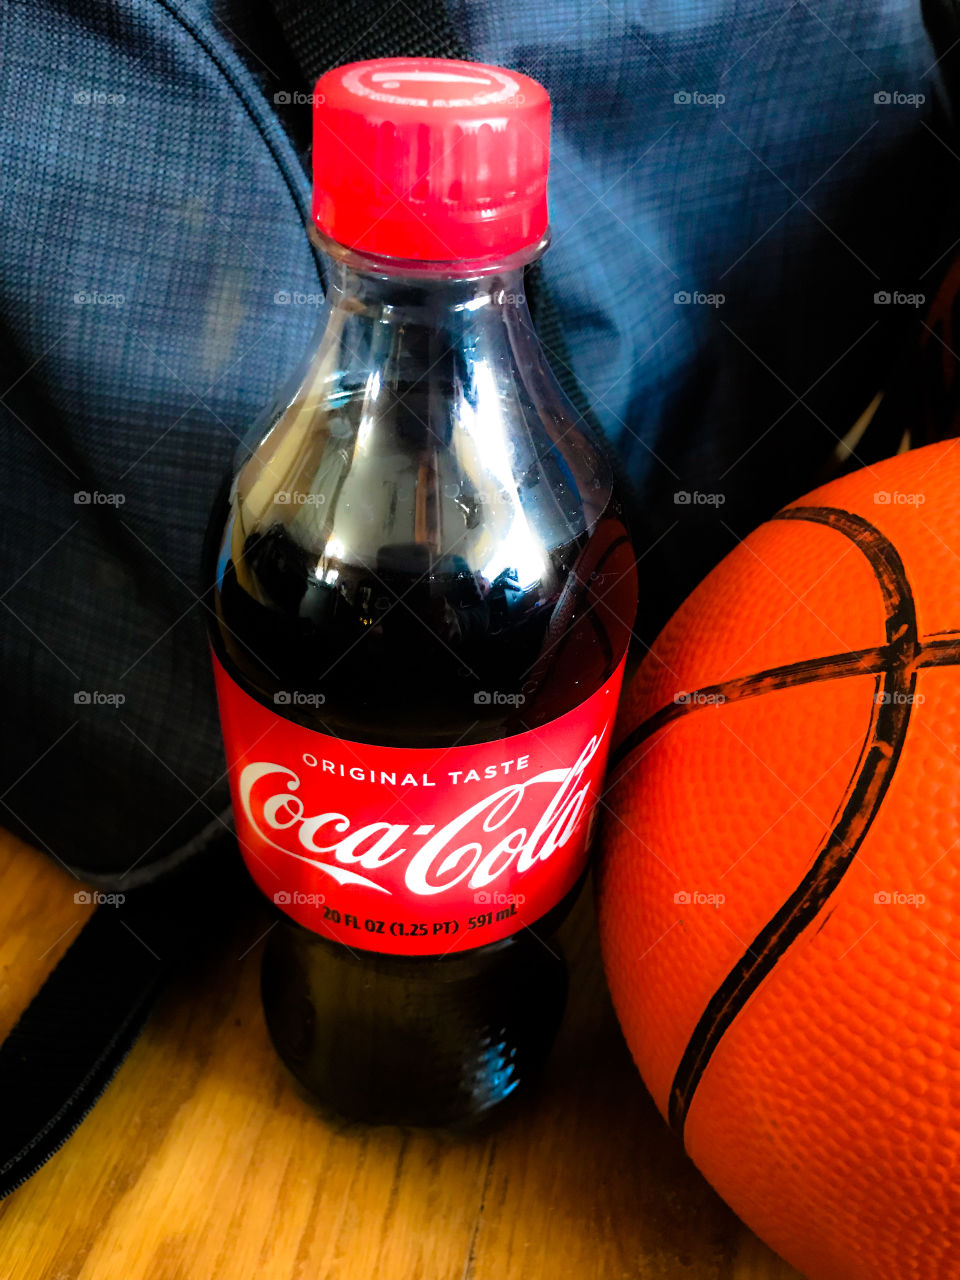 Basketball and gym bag with a soda bottle.